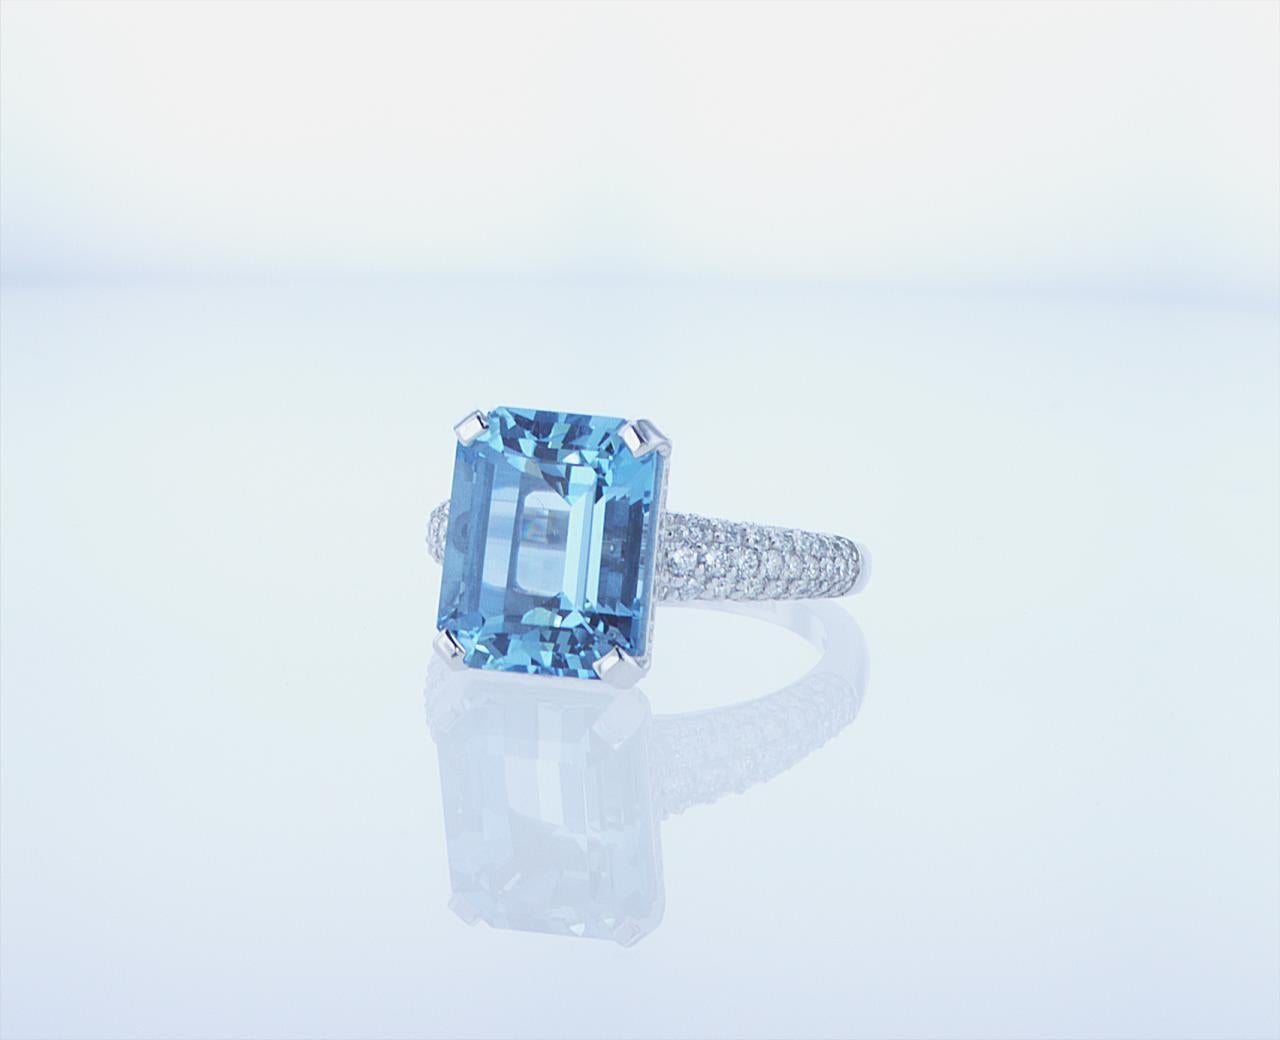 5.37ct Emerald Cut Aqua Cocktail Ring with 0.89ct Total Weight of G/H Color VS Clarity Round Brilliant Accent Diamonds.
